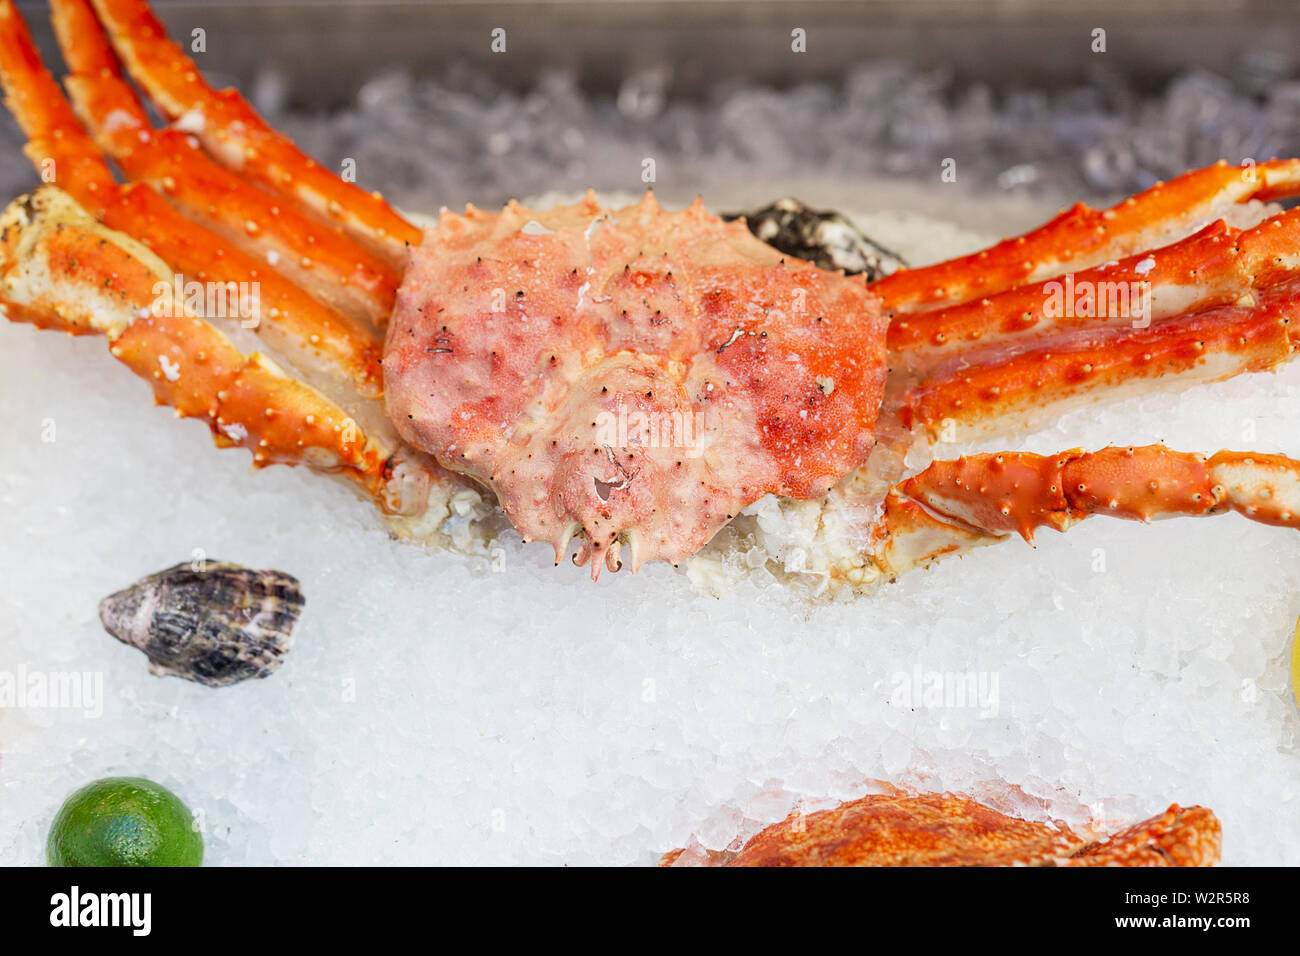 King crab on ice at street food festival. Concept of seafood in fast food. Stock Photo